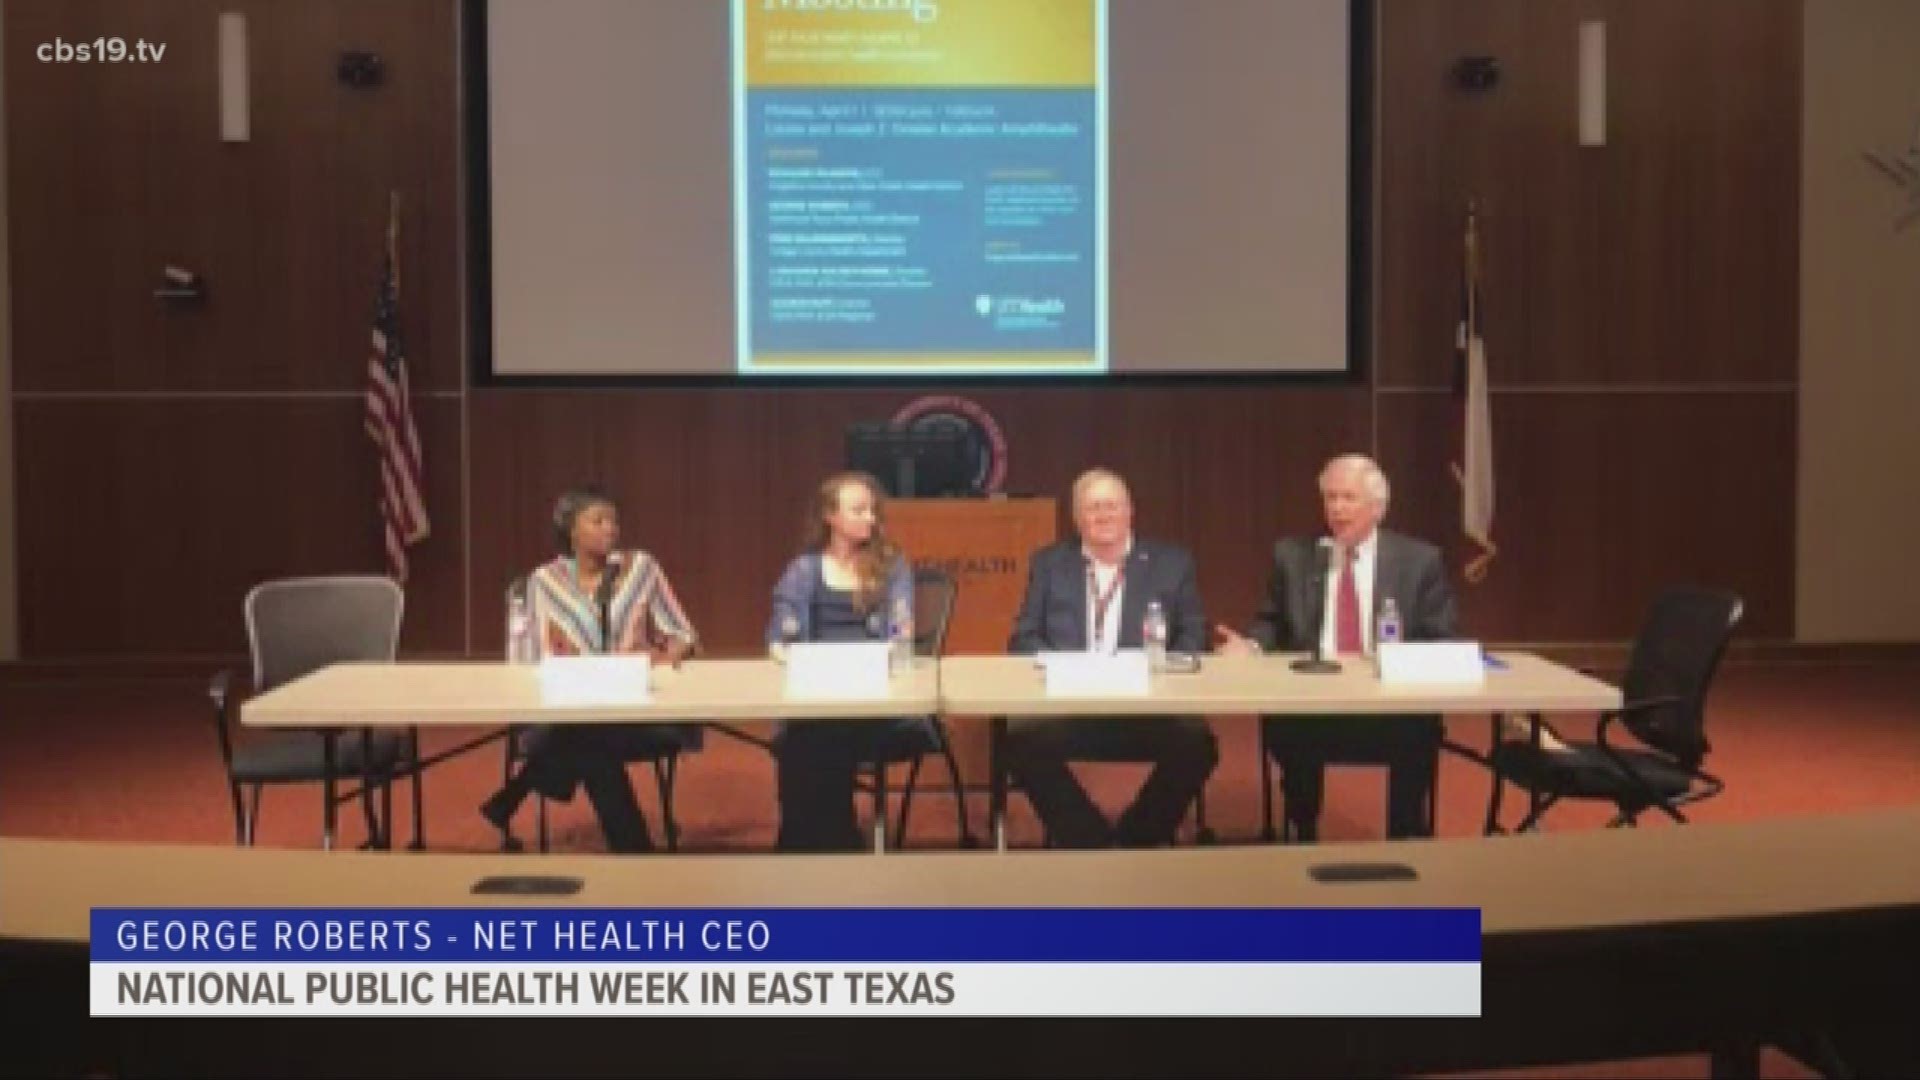 Health leaders in East Texas gather Monday to discuss public health.